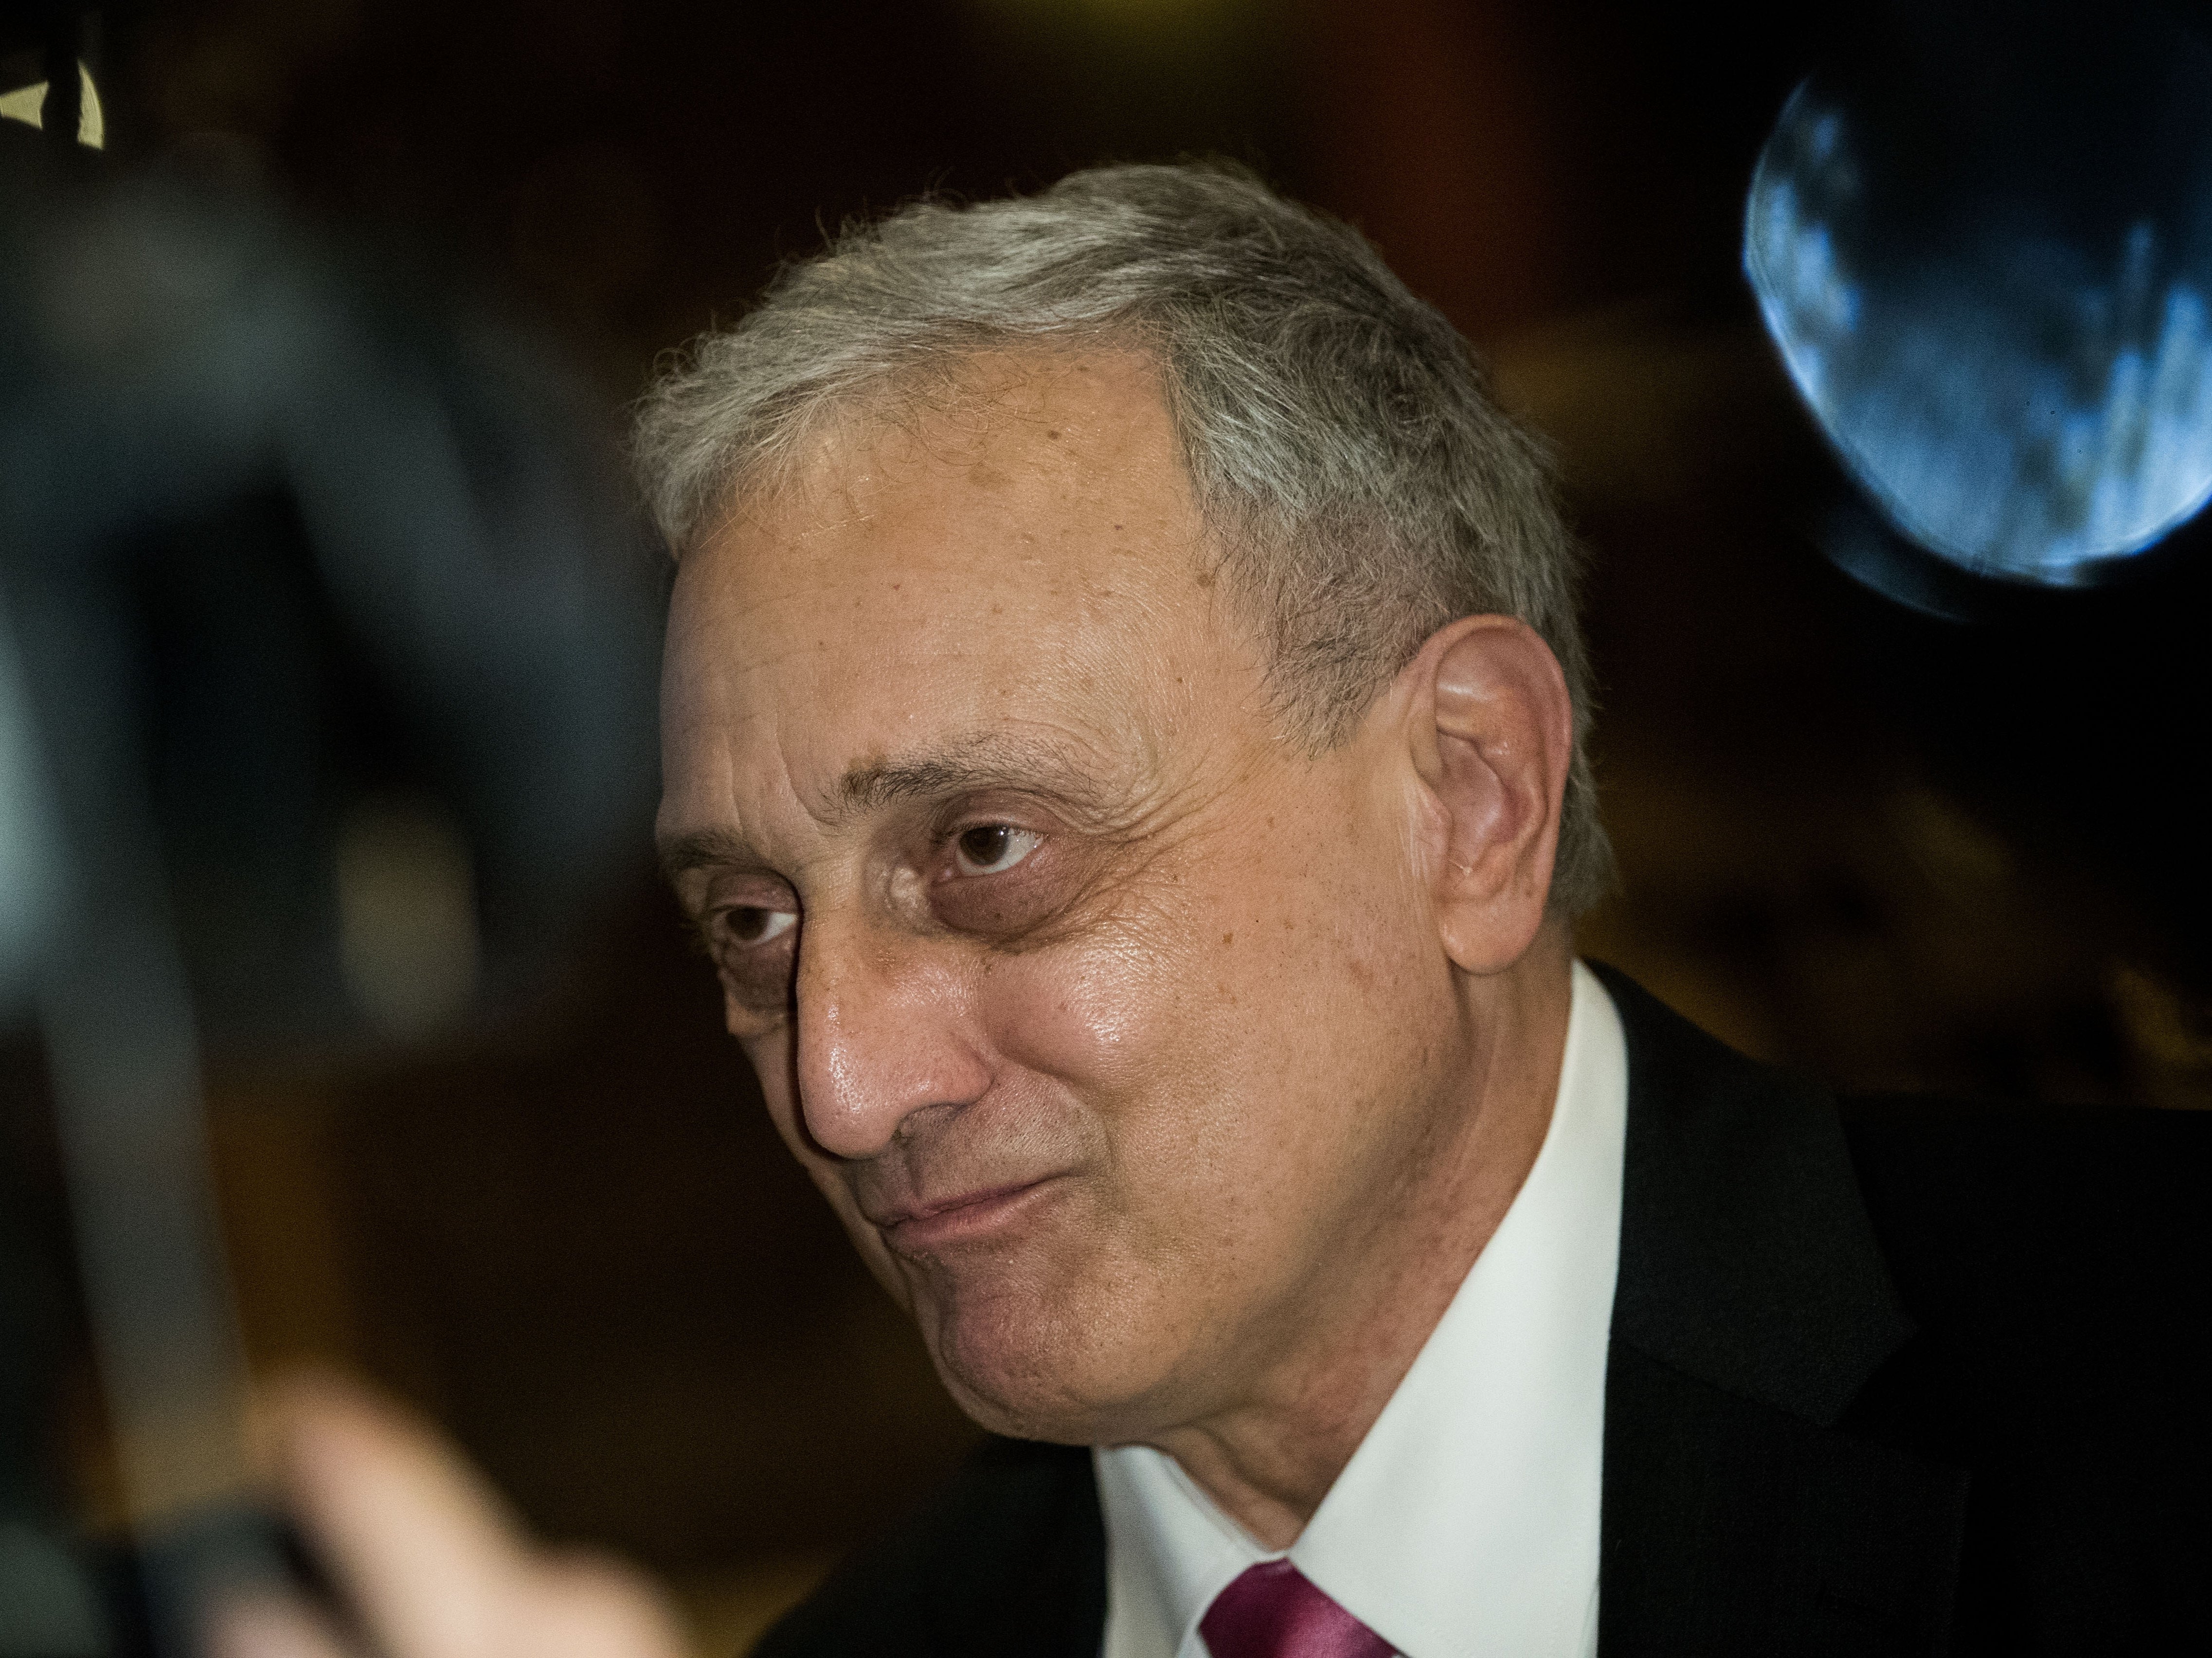 Carl Paladino, former New York gubernatorial candidate, speaks to reporters in the lobby at Trump Tower, December 5, 2016 in New York City